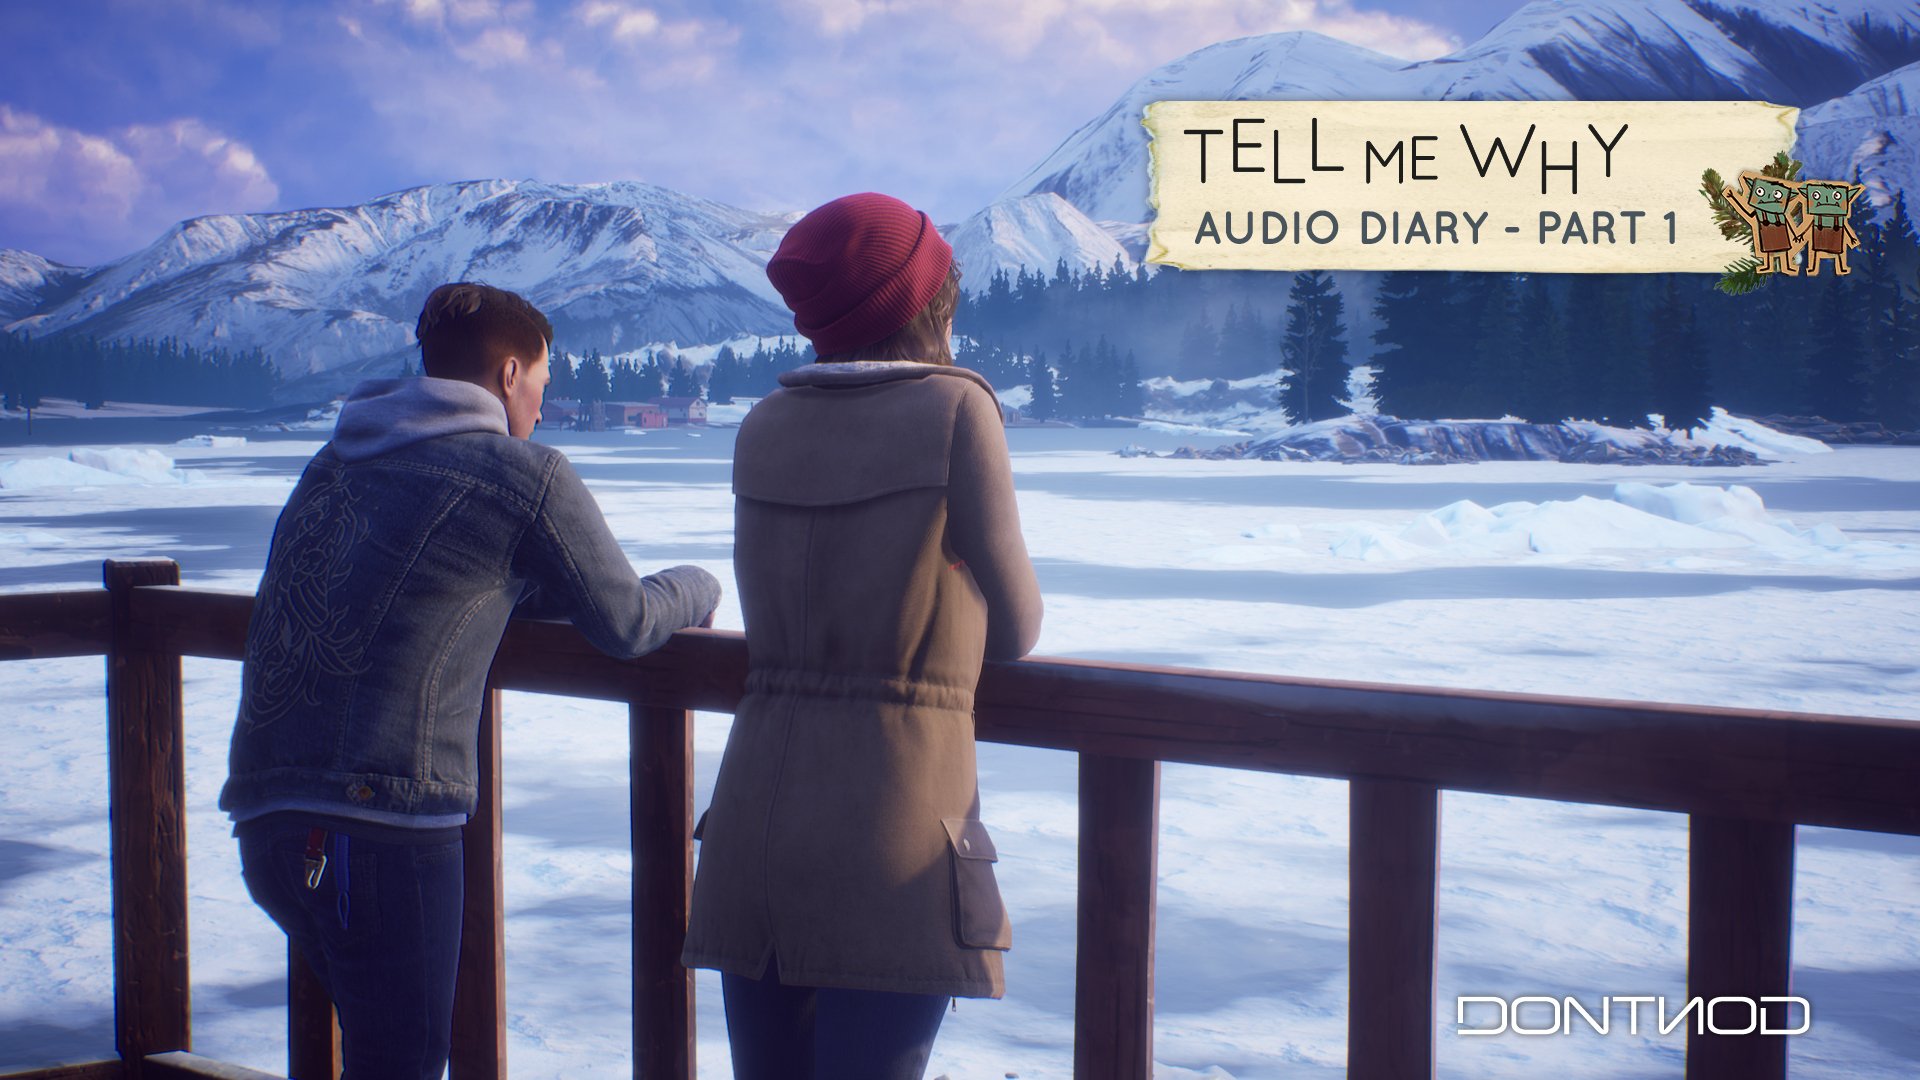 Tell me why (игра). Tell me why Скриншоты. Tell me everything игра. Tell me why обои. Tell me why to do